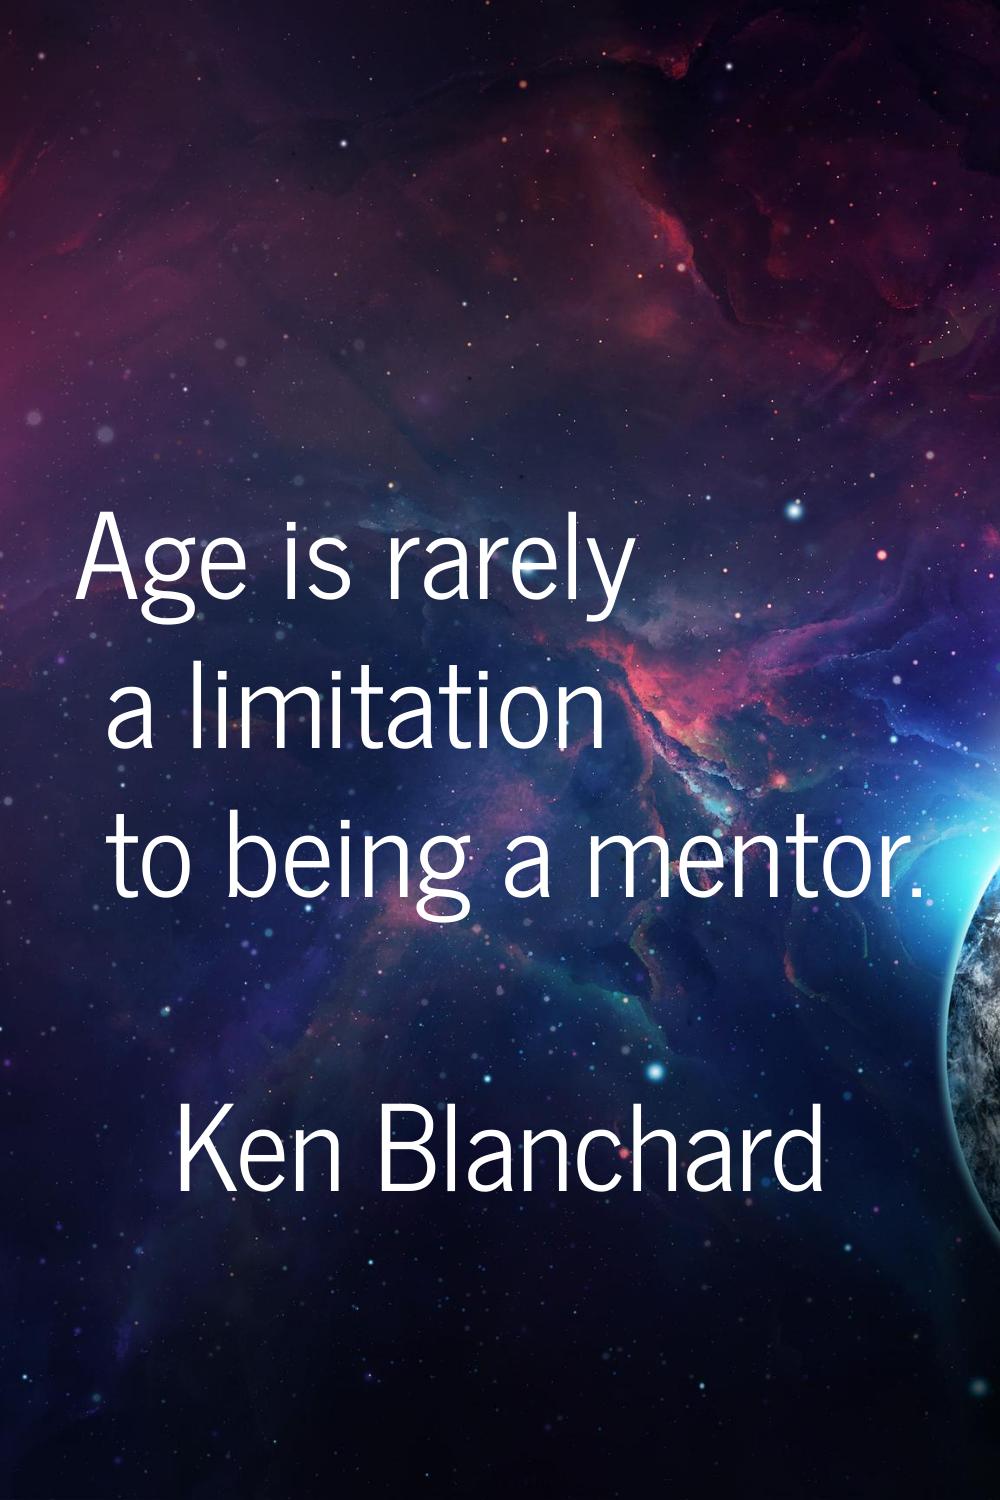 Age is rarely a limitation to being a mentor.